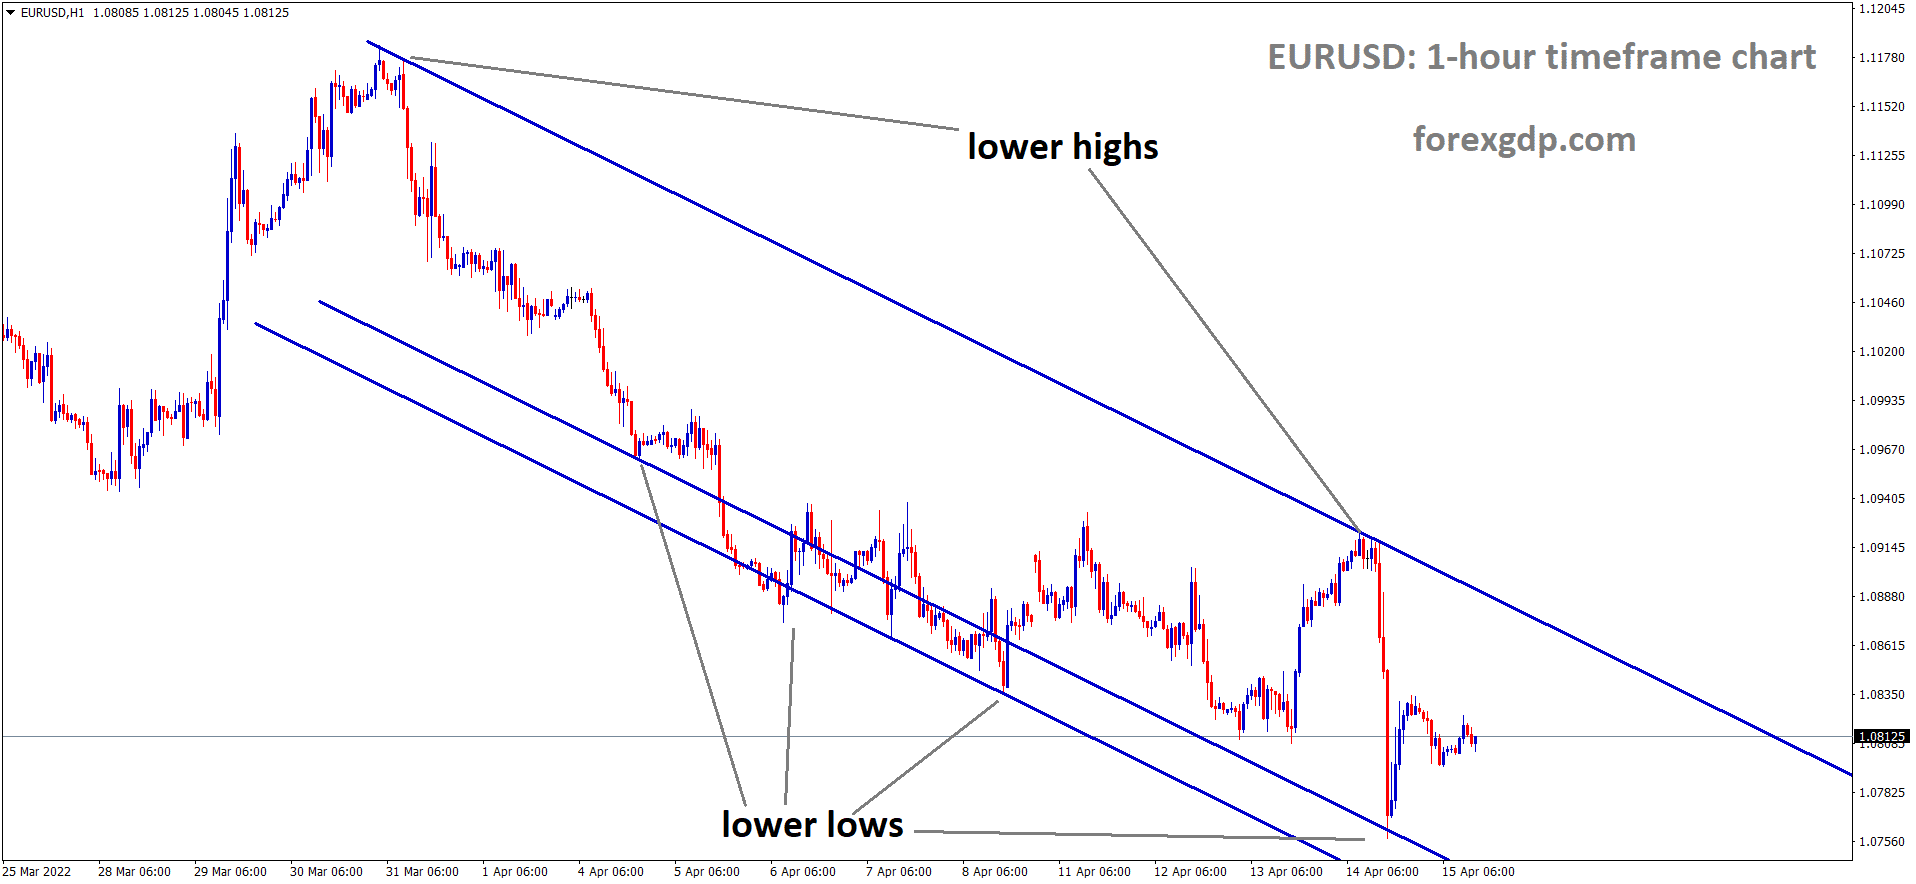 EURUSD H1 Time Frame Analysis Market is moving in the Descending channel and the market has rebounded from the lower low area of the Channel